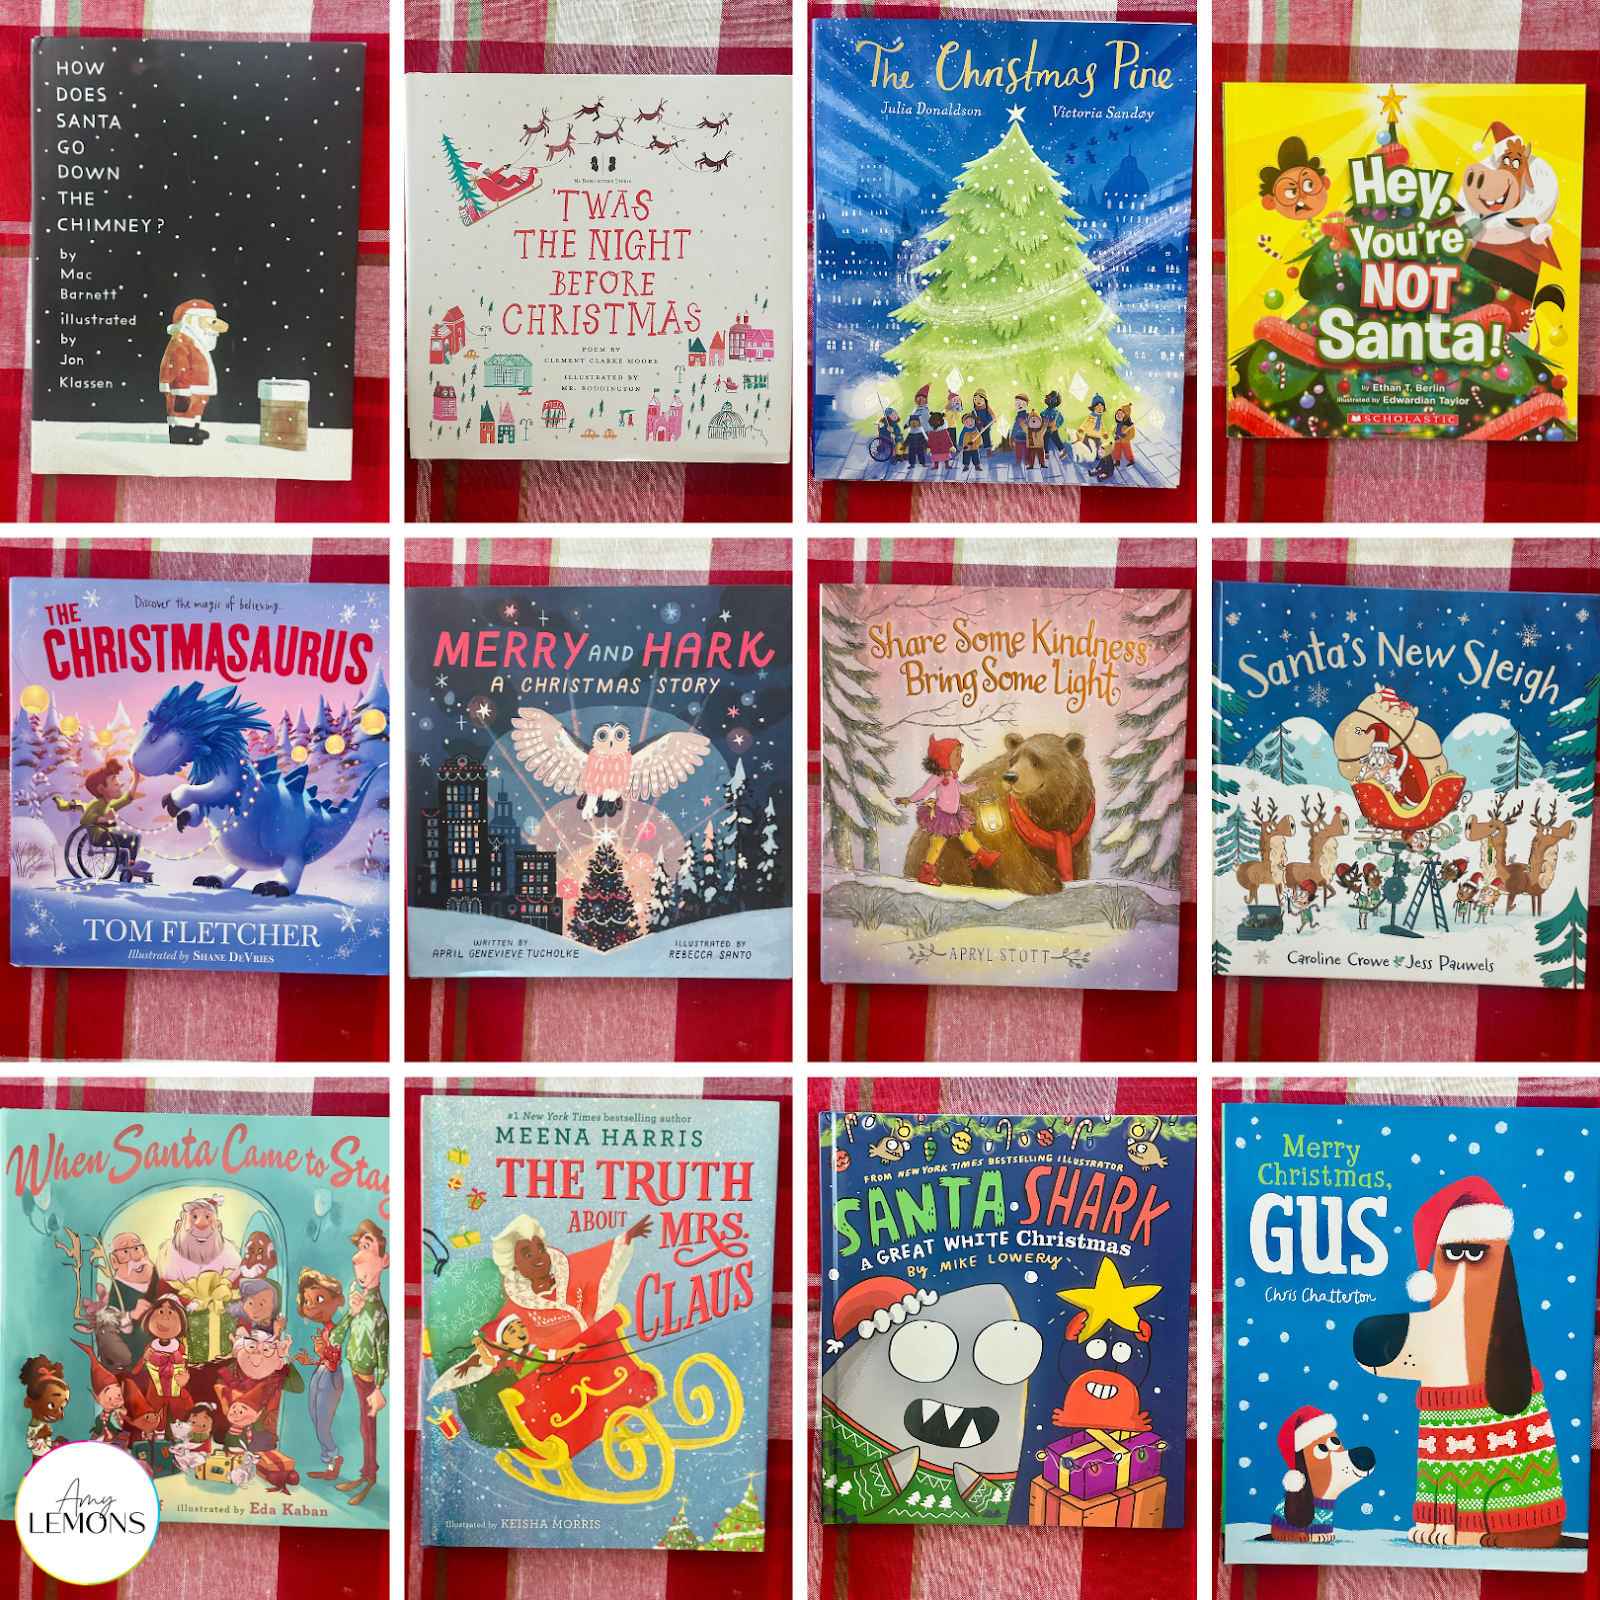 12 Christmas book recommendations for the Christmas book countdown family tradition